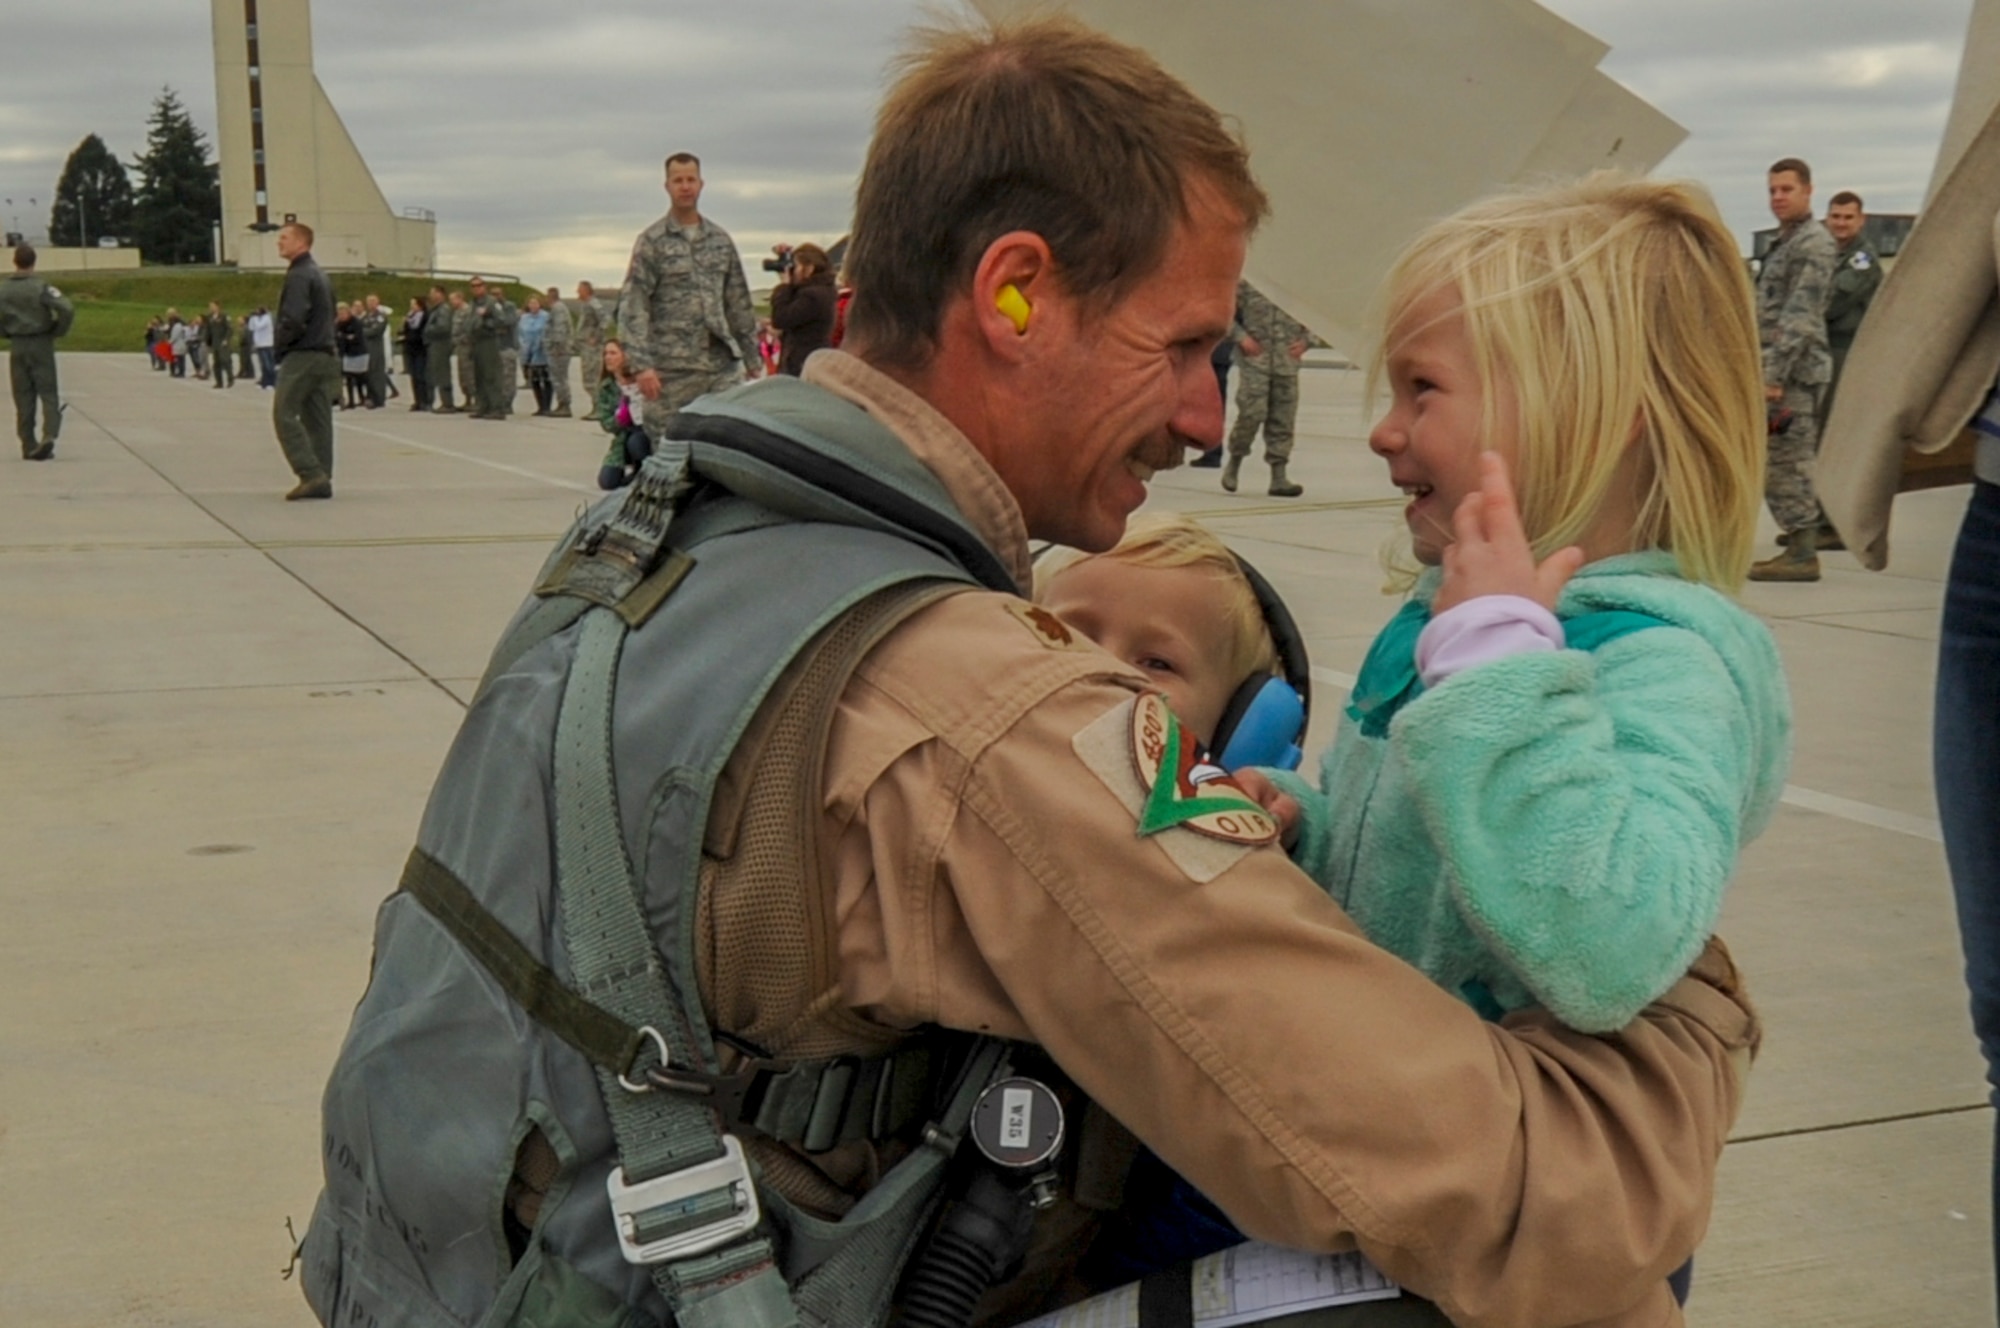 An Airman assigned to the 480th Expeditionary Fighter Squadron reunites with his children during the squadron’s return to Spangdahlem Air Base, Germany, Oct. 6, 2016. Approximately 300 of the Airmen, who serve in flight, maintenance or support roles for the F-16 Fighting Falcon fighter aircraft, completed a six-month deployment to Southwest Asia by providing close air support and dynamic targeting operations as part of the squadron’s first deployment in support of Operation Inherent Resolve. Operation Inherent Resolve aims to eliminate the Da'esh terrorist group and the threat they pose to Iraq, Syria and the wider international community. (U.S. Air Force photo by Staff Sgt. Joe W. McFadden)